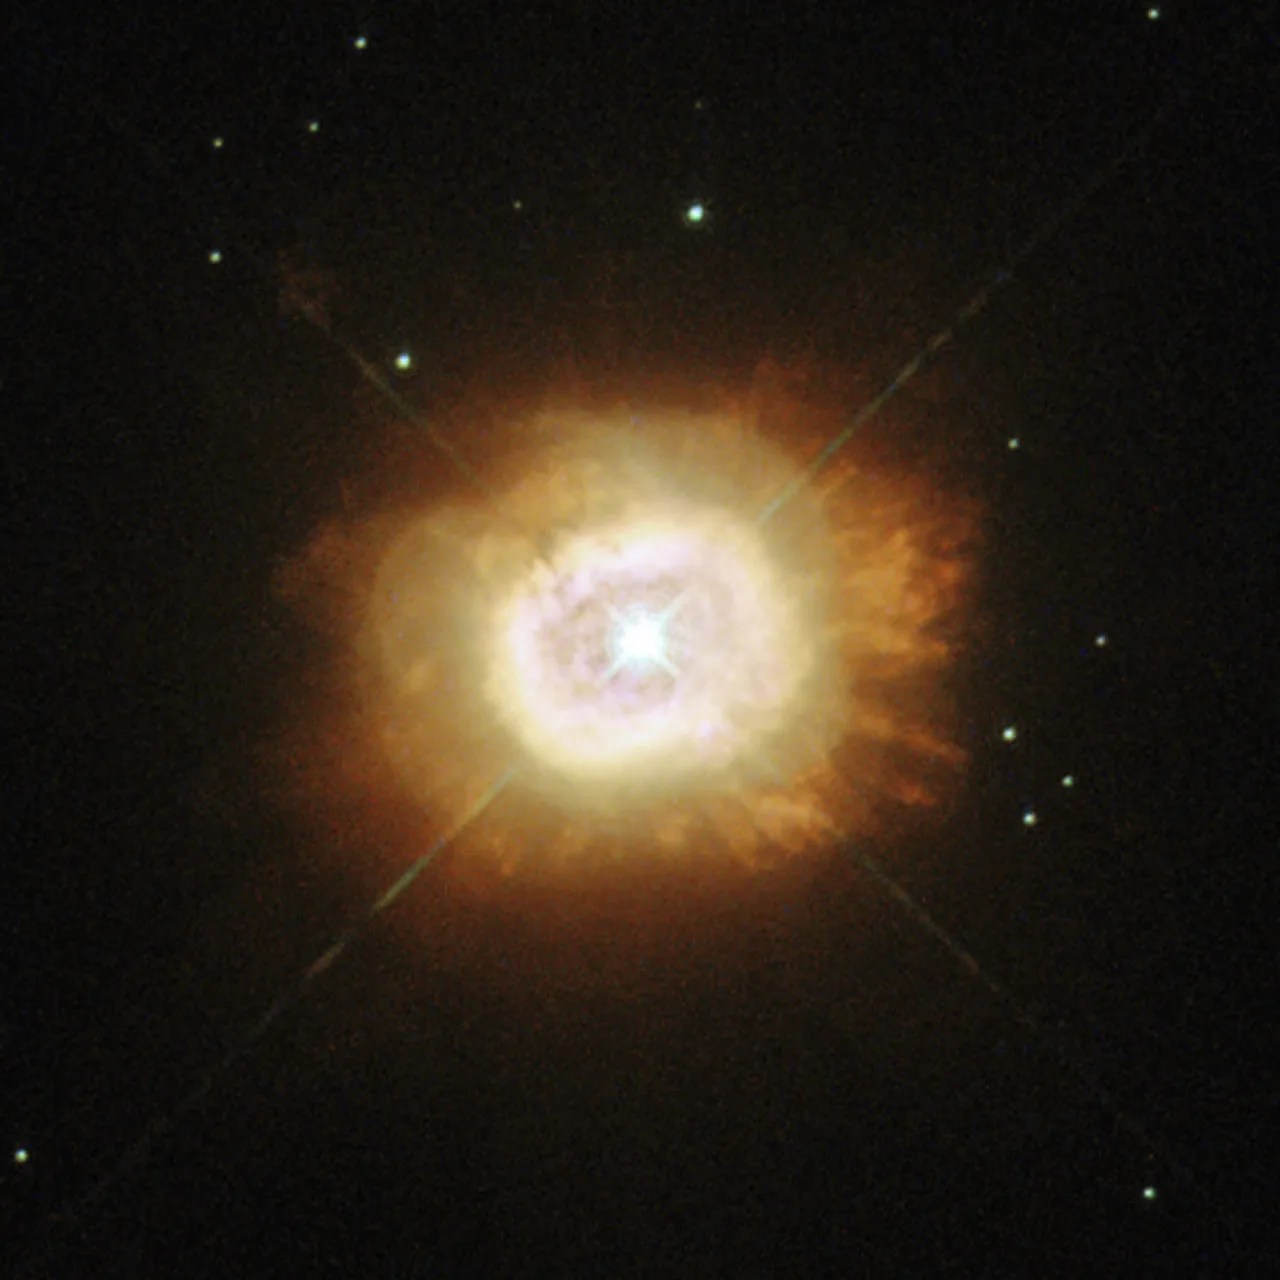 Brilliant star with lens-rays surrounded by orange vapor